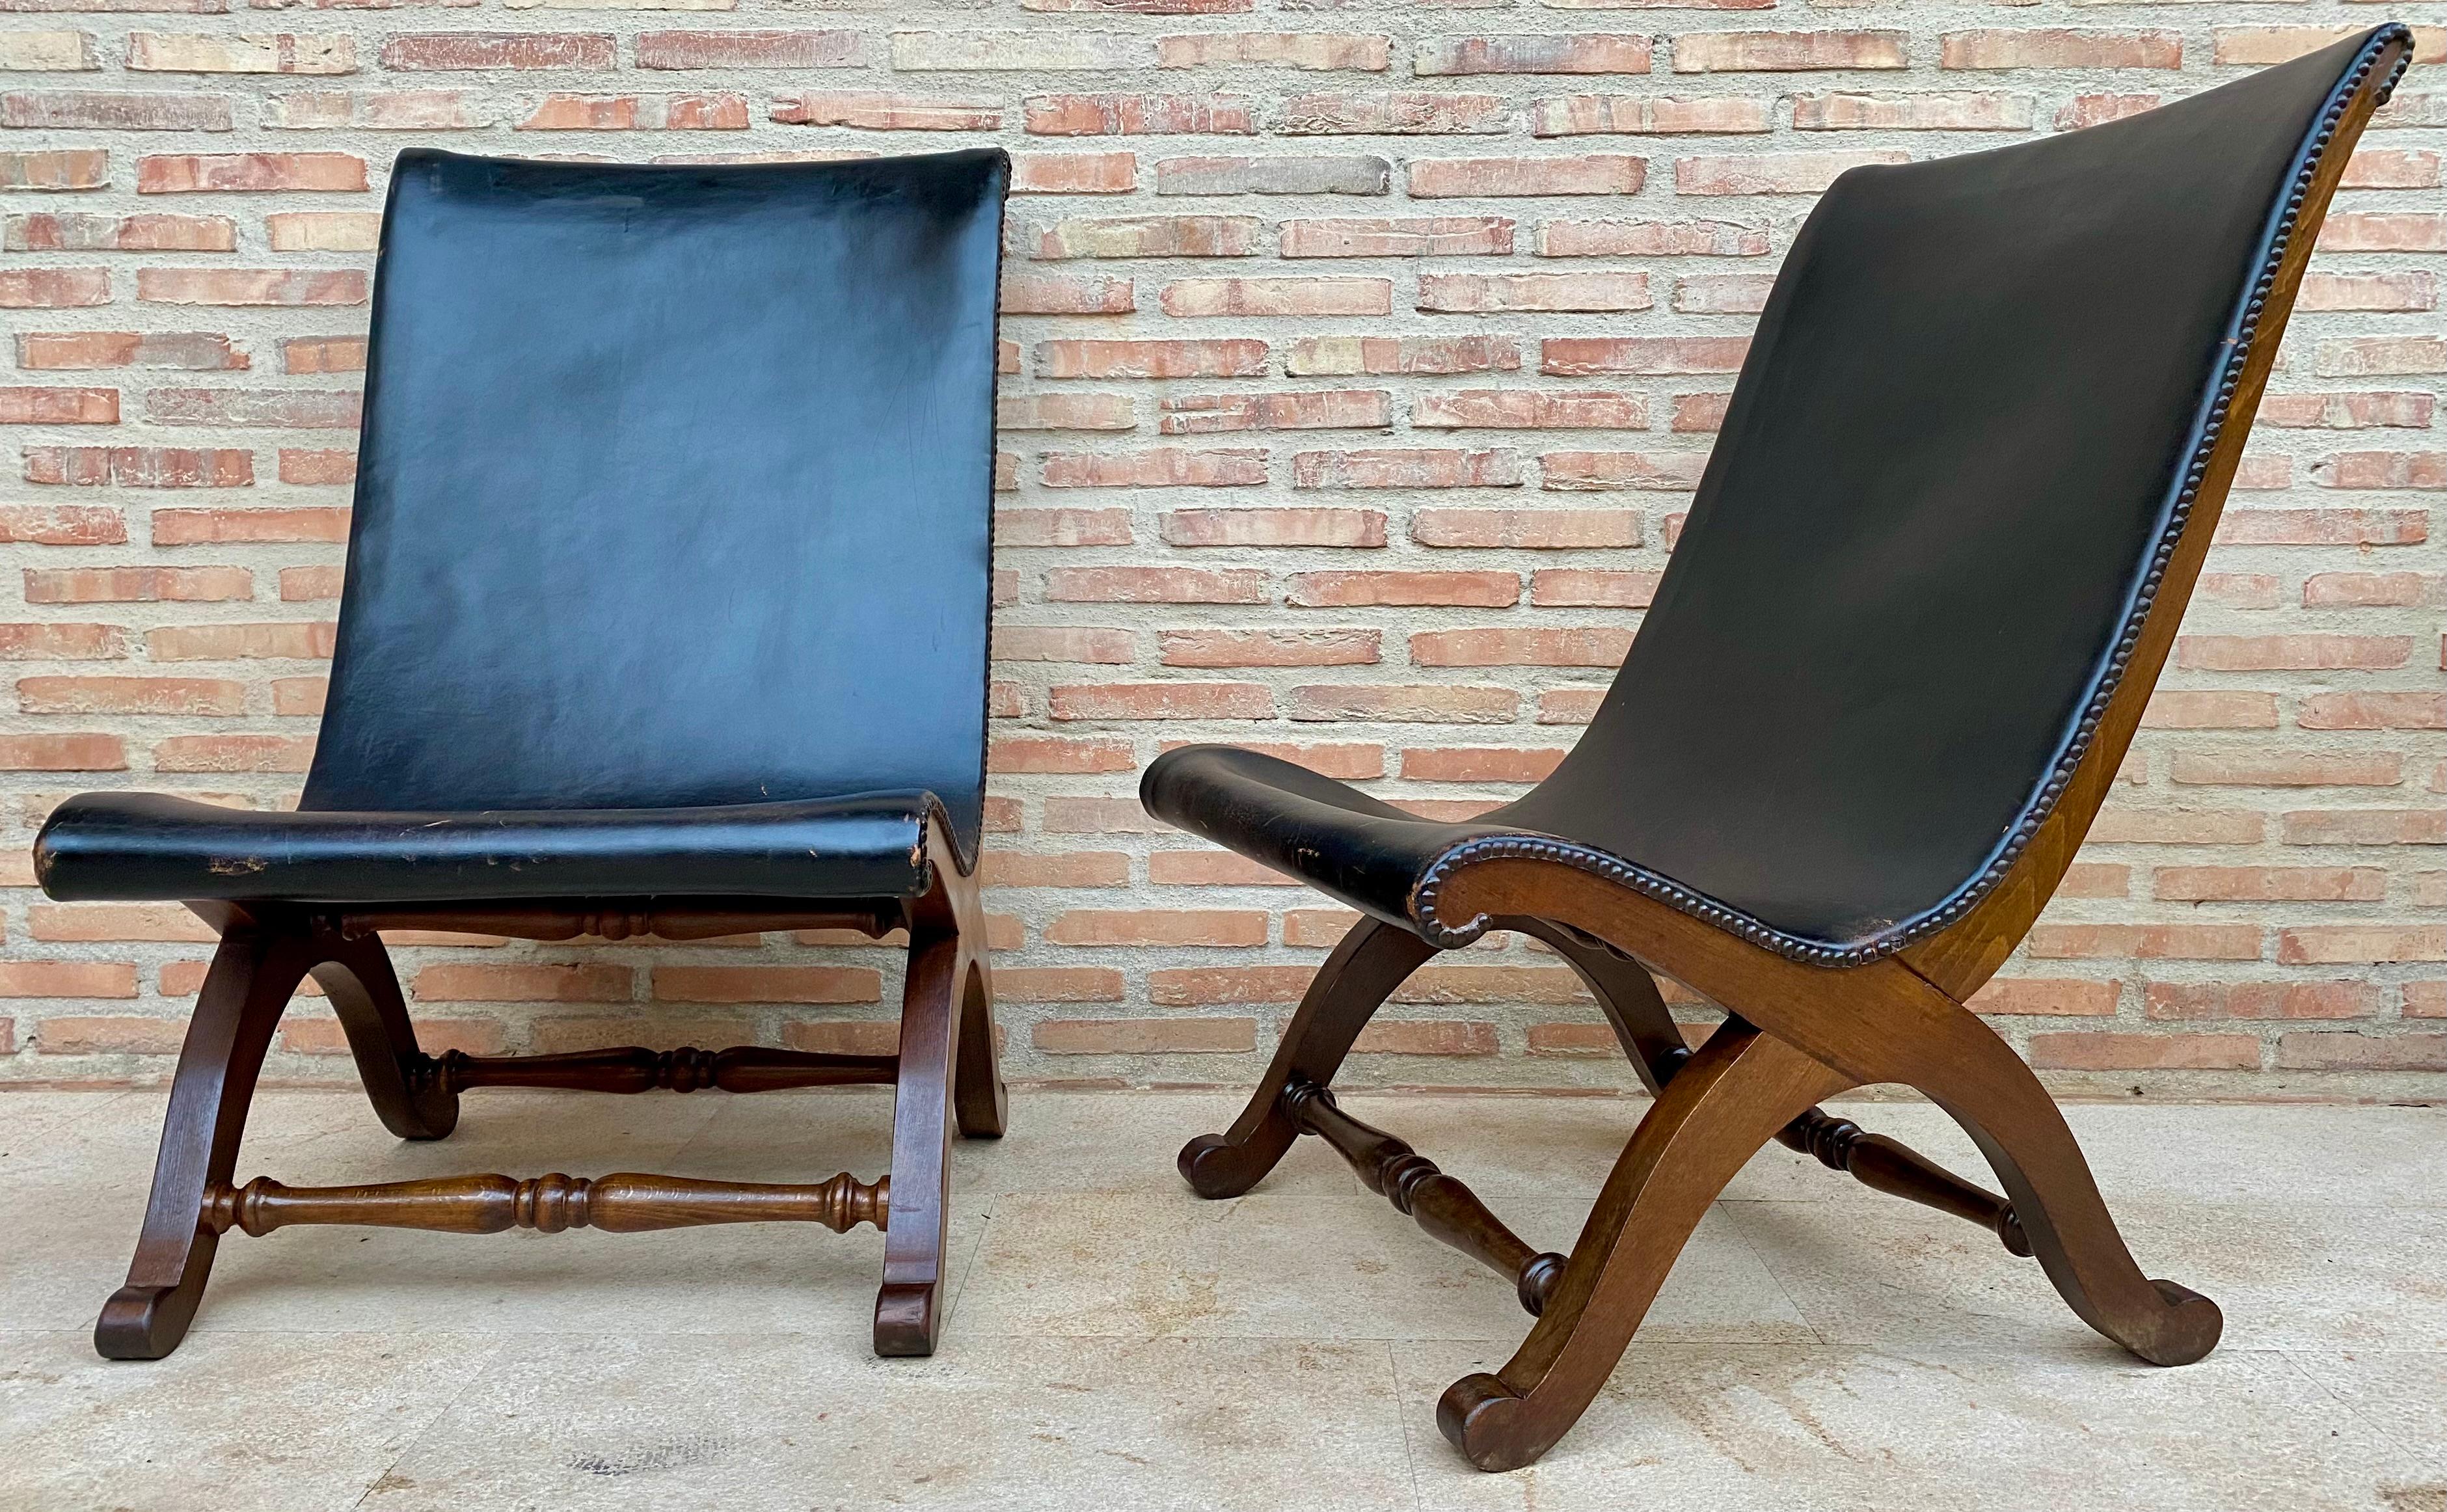 Pair of Spanish black leather armchairs by Pierre Lottier for Valenti, 1940s with brass nail head details and original leather.

Pierre Lottier was born in France before moving to Spain where he worked as a designer, working with the likes of Ava